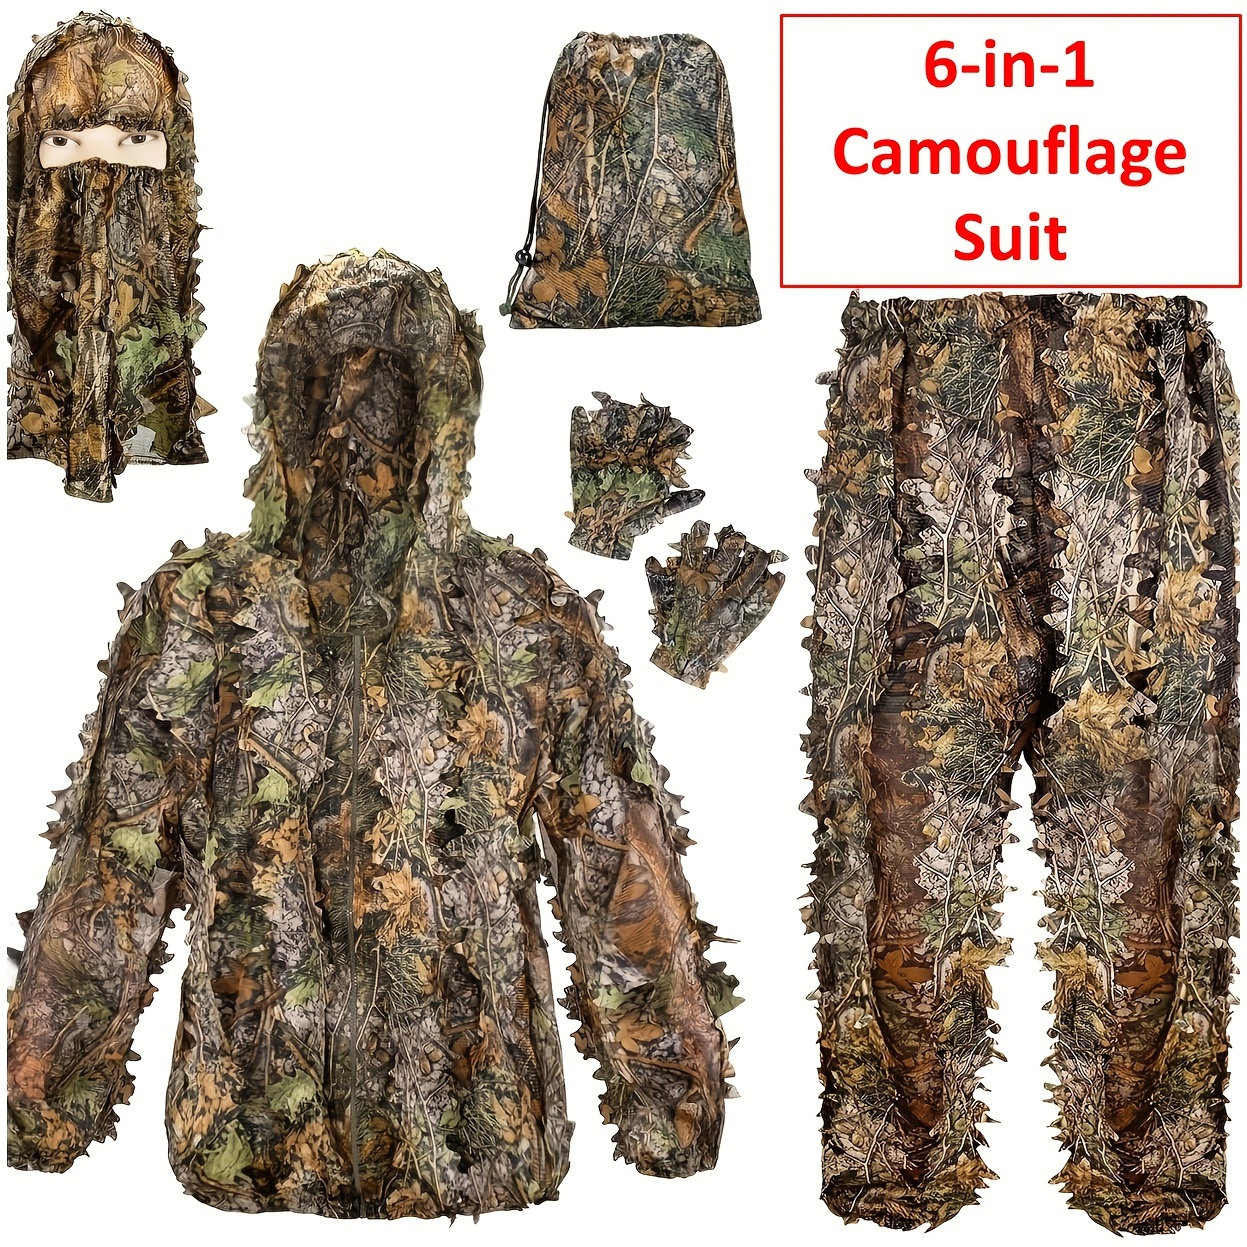 

Lightweight Camouflage Hunting Suit With Hood - Stay Hidden And Comfortable During Your Hunt